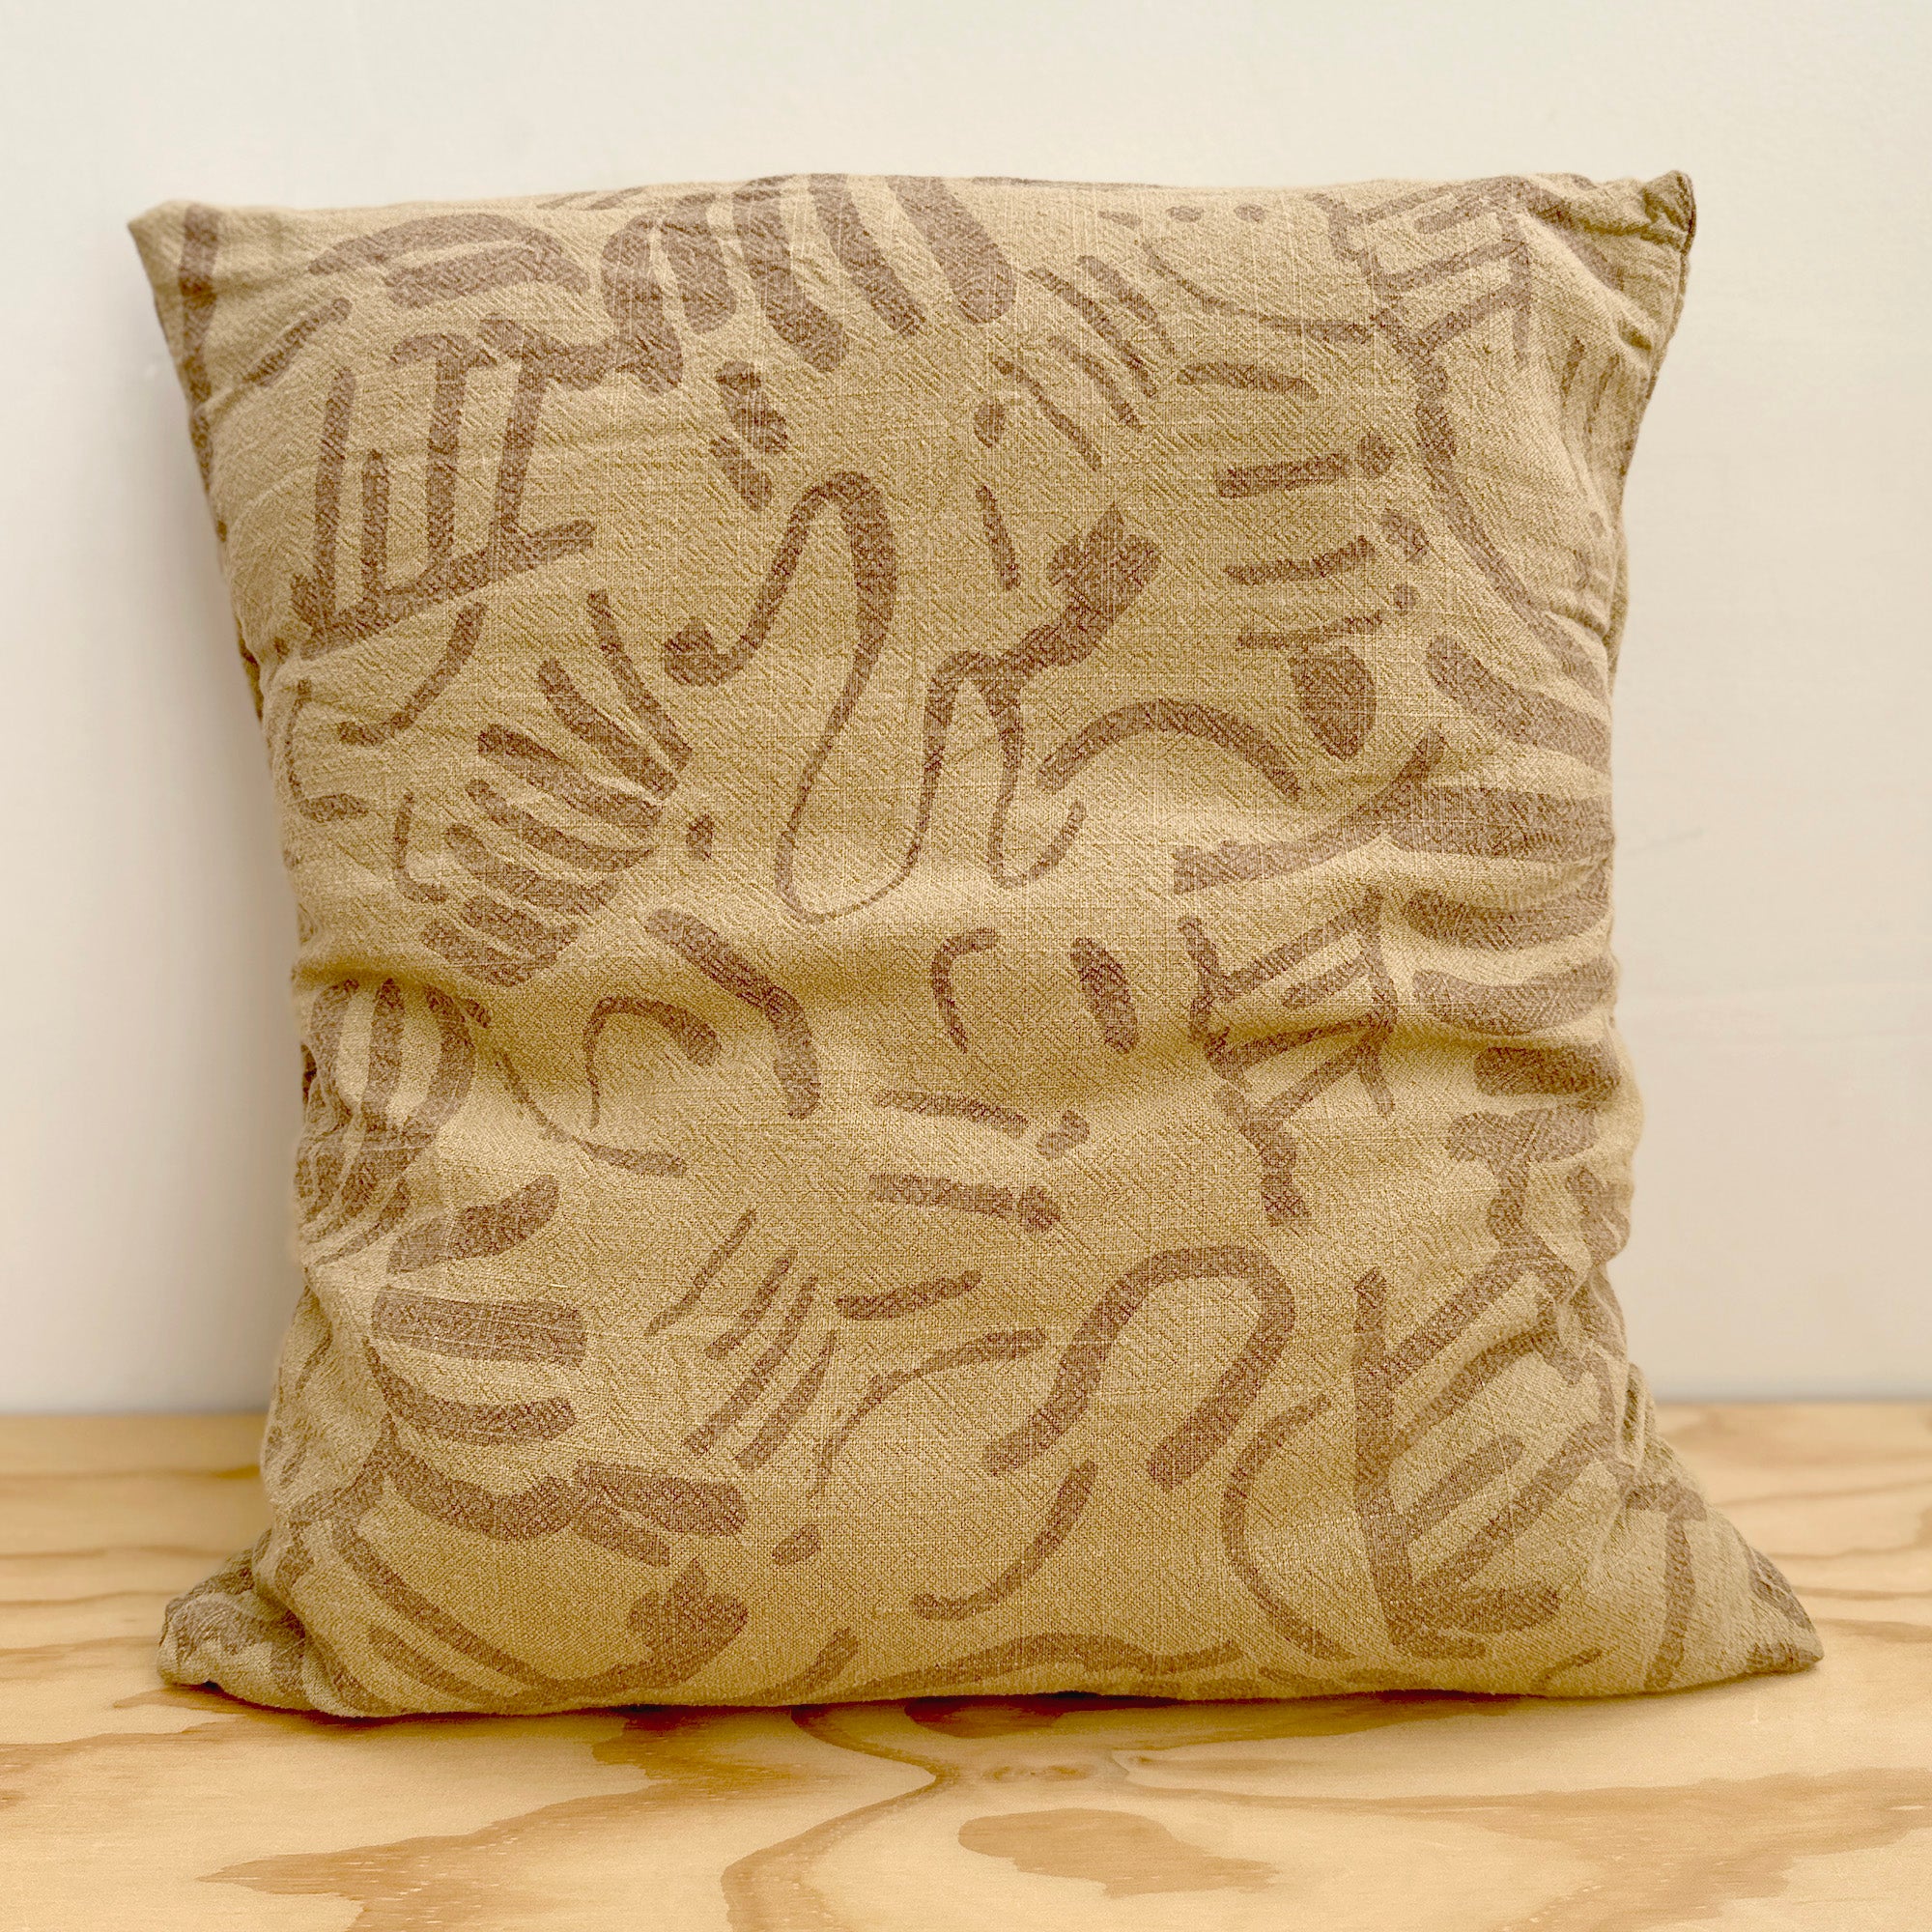 The Square Throw Pillow - Fold in Clay and Camel